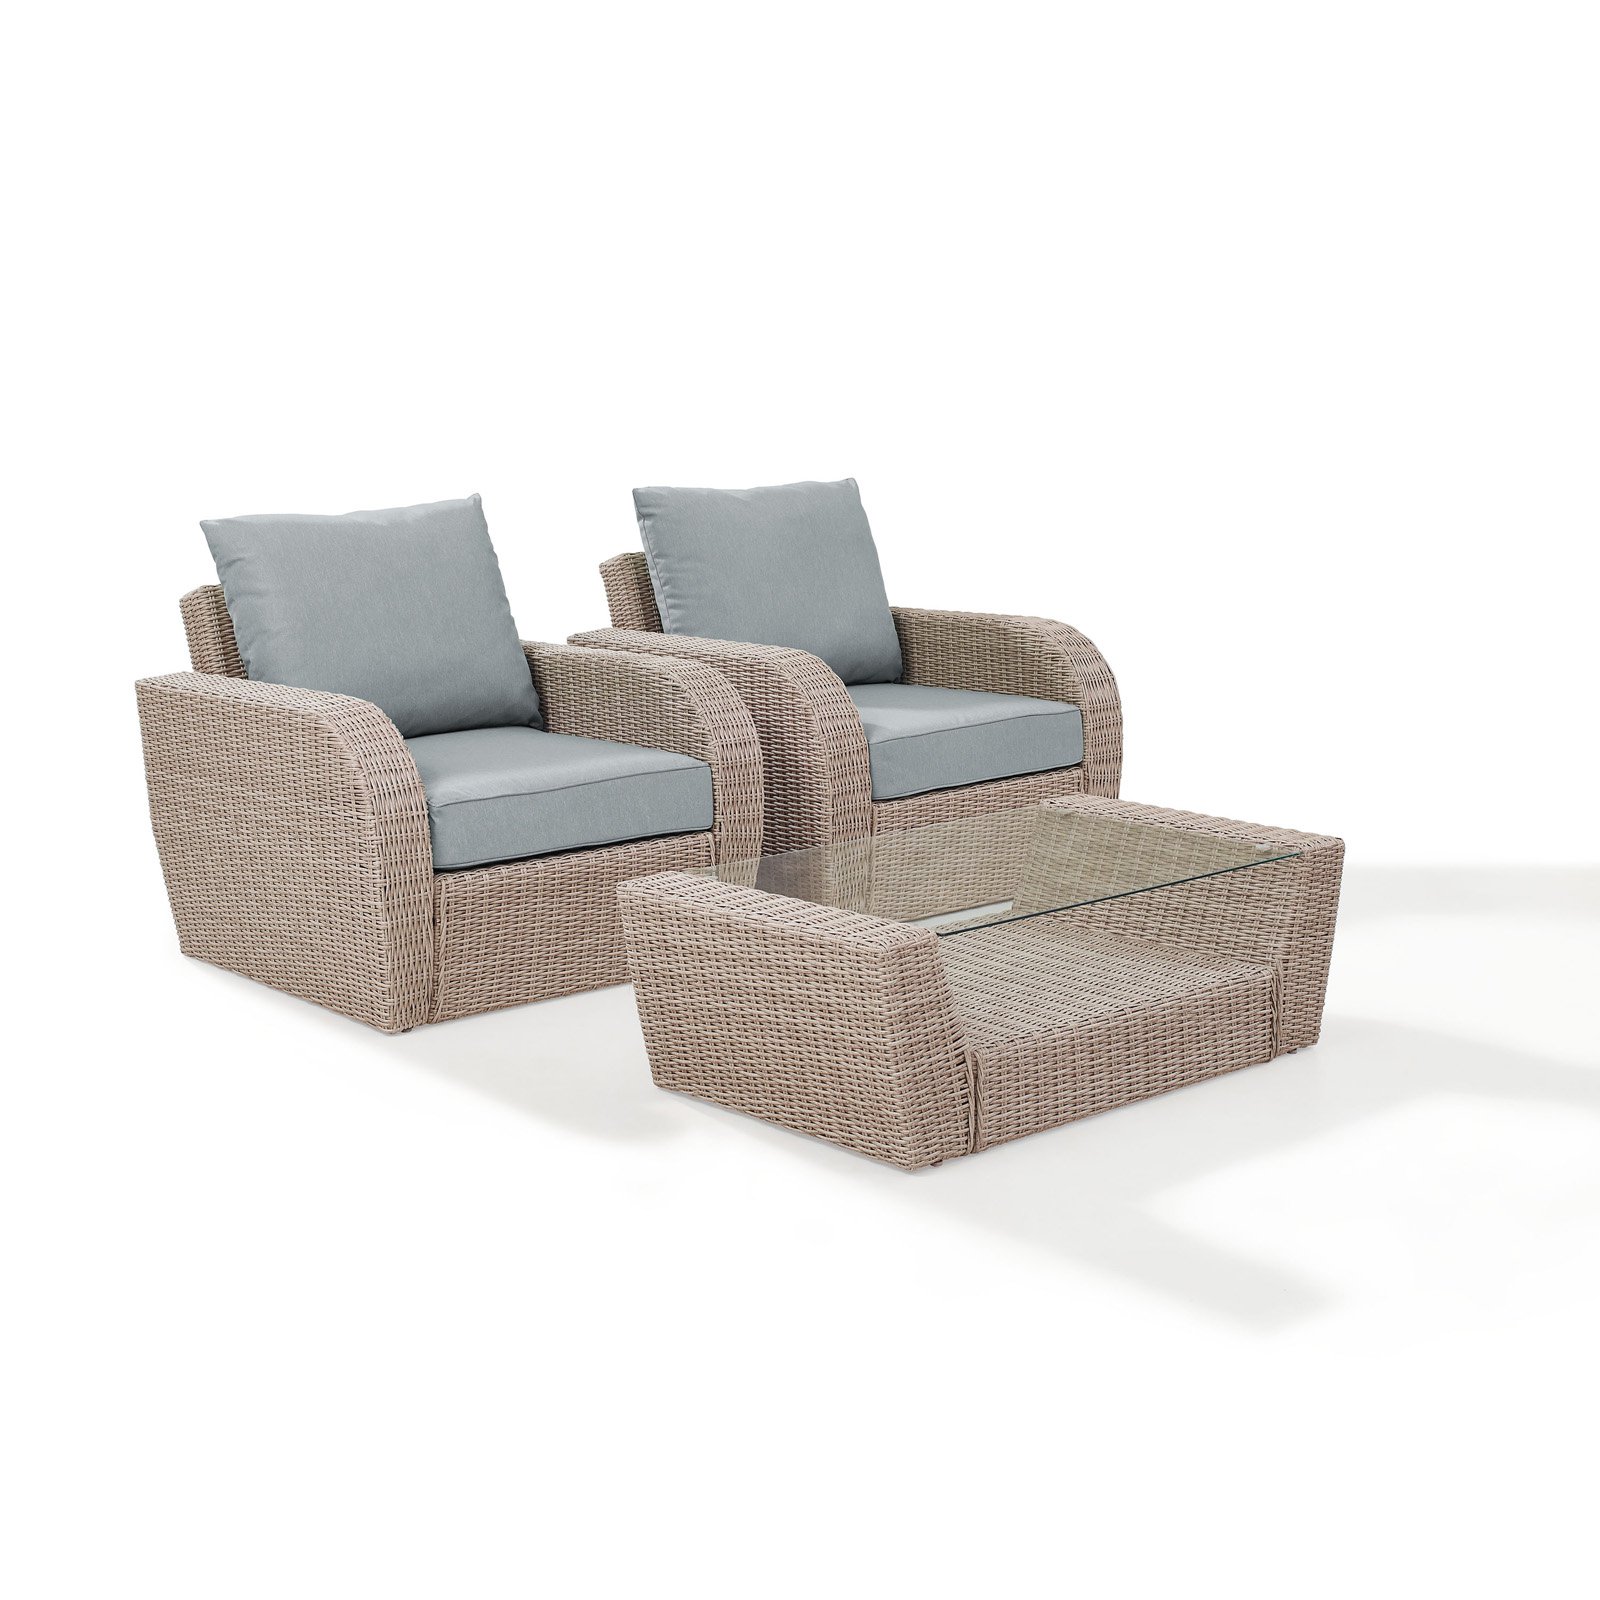 Crosley Furniture St Augustine 3 Pc Outdoor Wicker Seating Set With Mist Cushion - Two Outdoor Wicker Chairs, Coffee Table - image 1 of 11